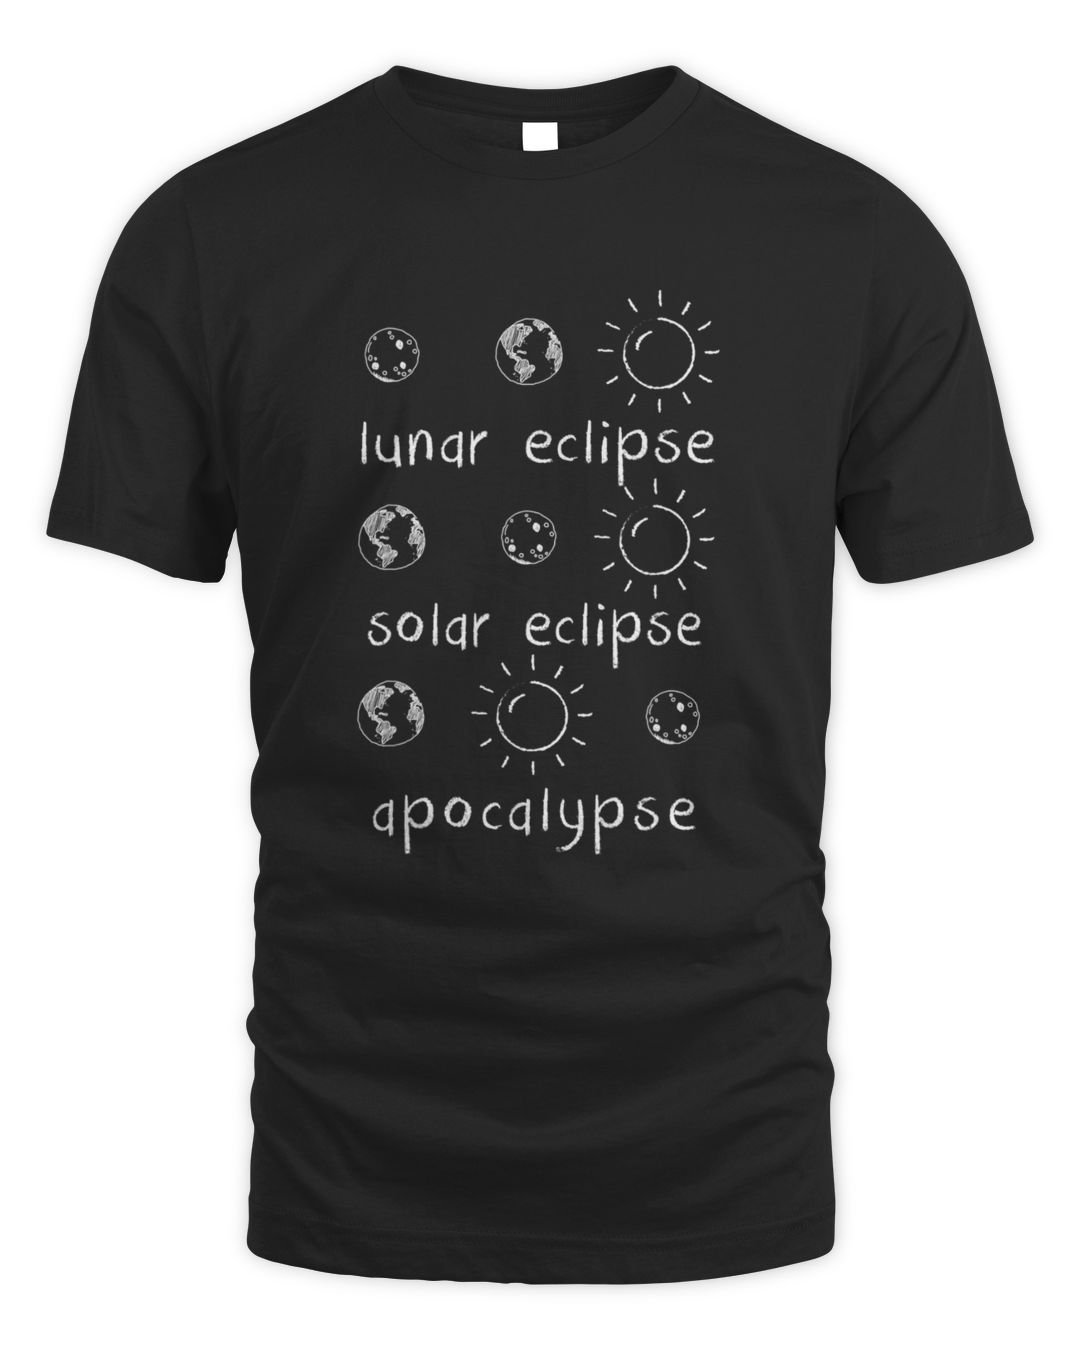 Lunar Solar Eclipse and Apocalypse Funny Science T-shirt | Ducon Space